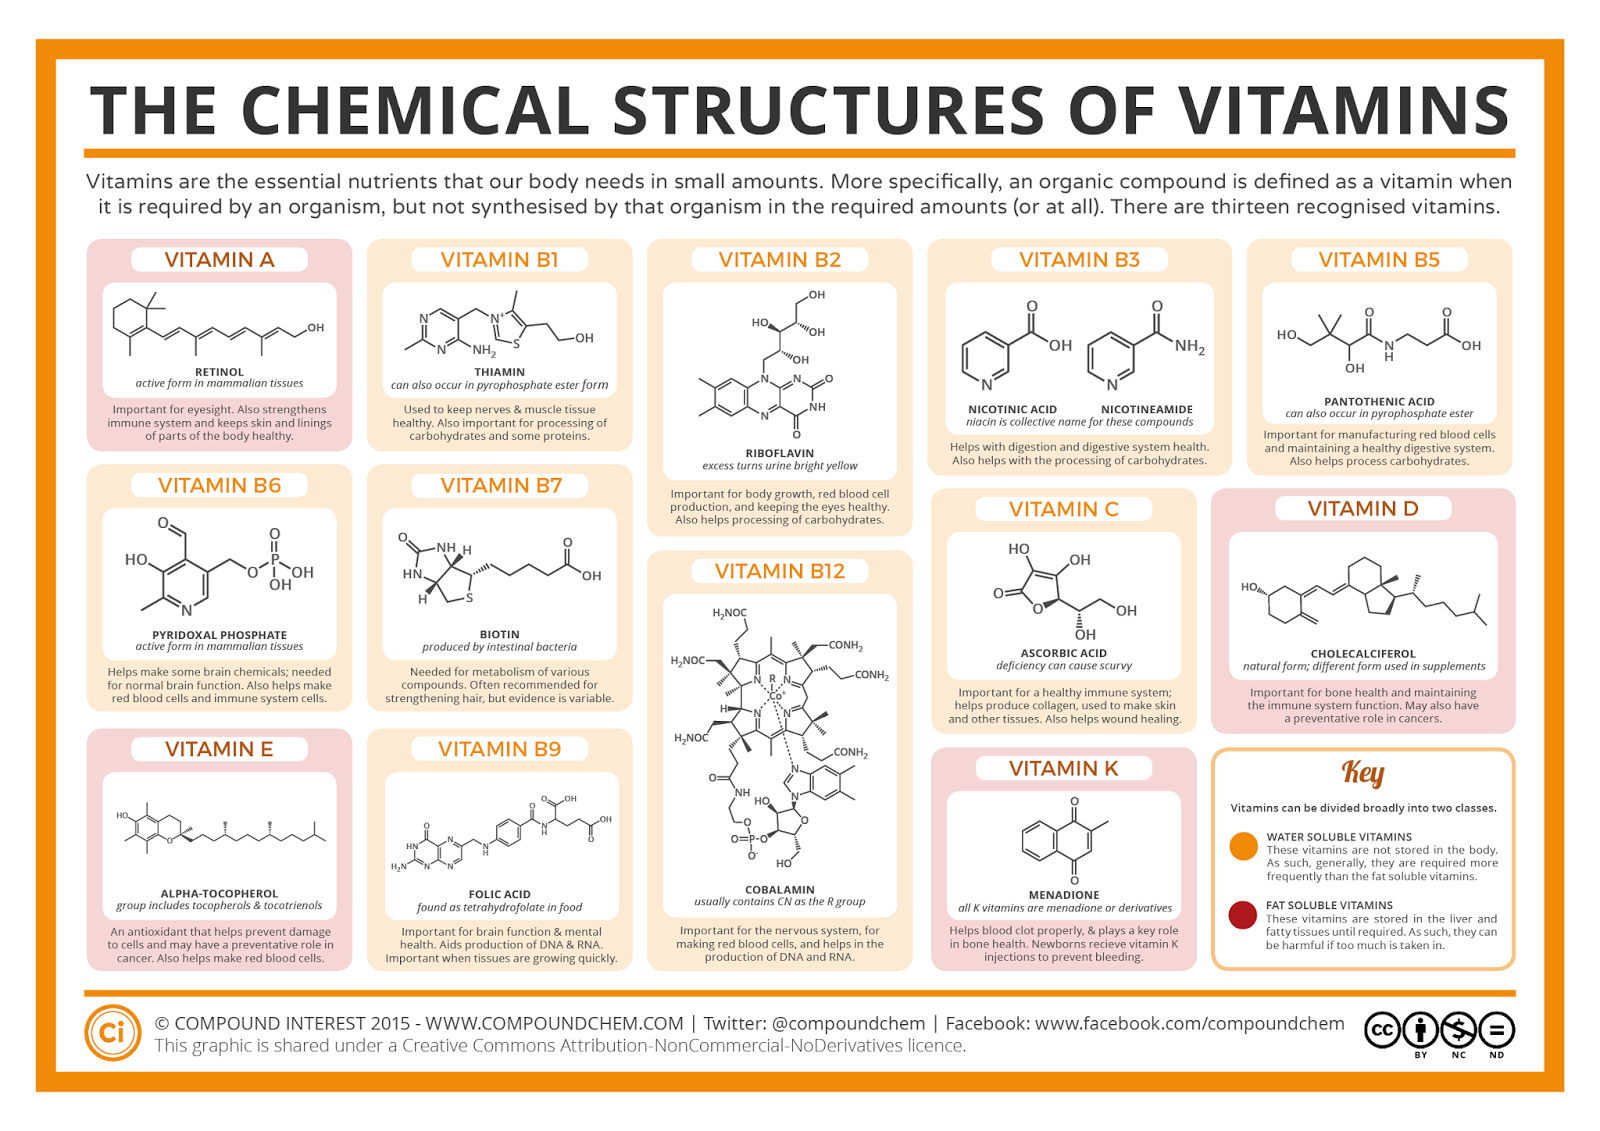 http://www.compoundchem.com/wp-content/uploads/2015/01/Chemical-Structures-of-Vitamins-FINAL.png